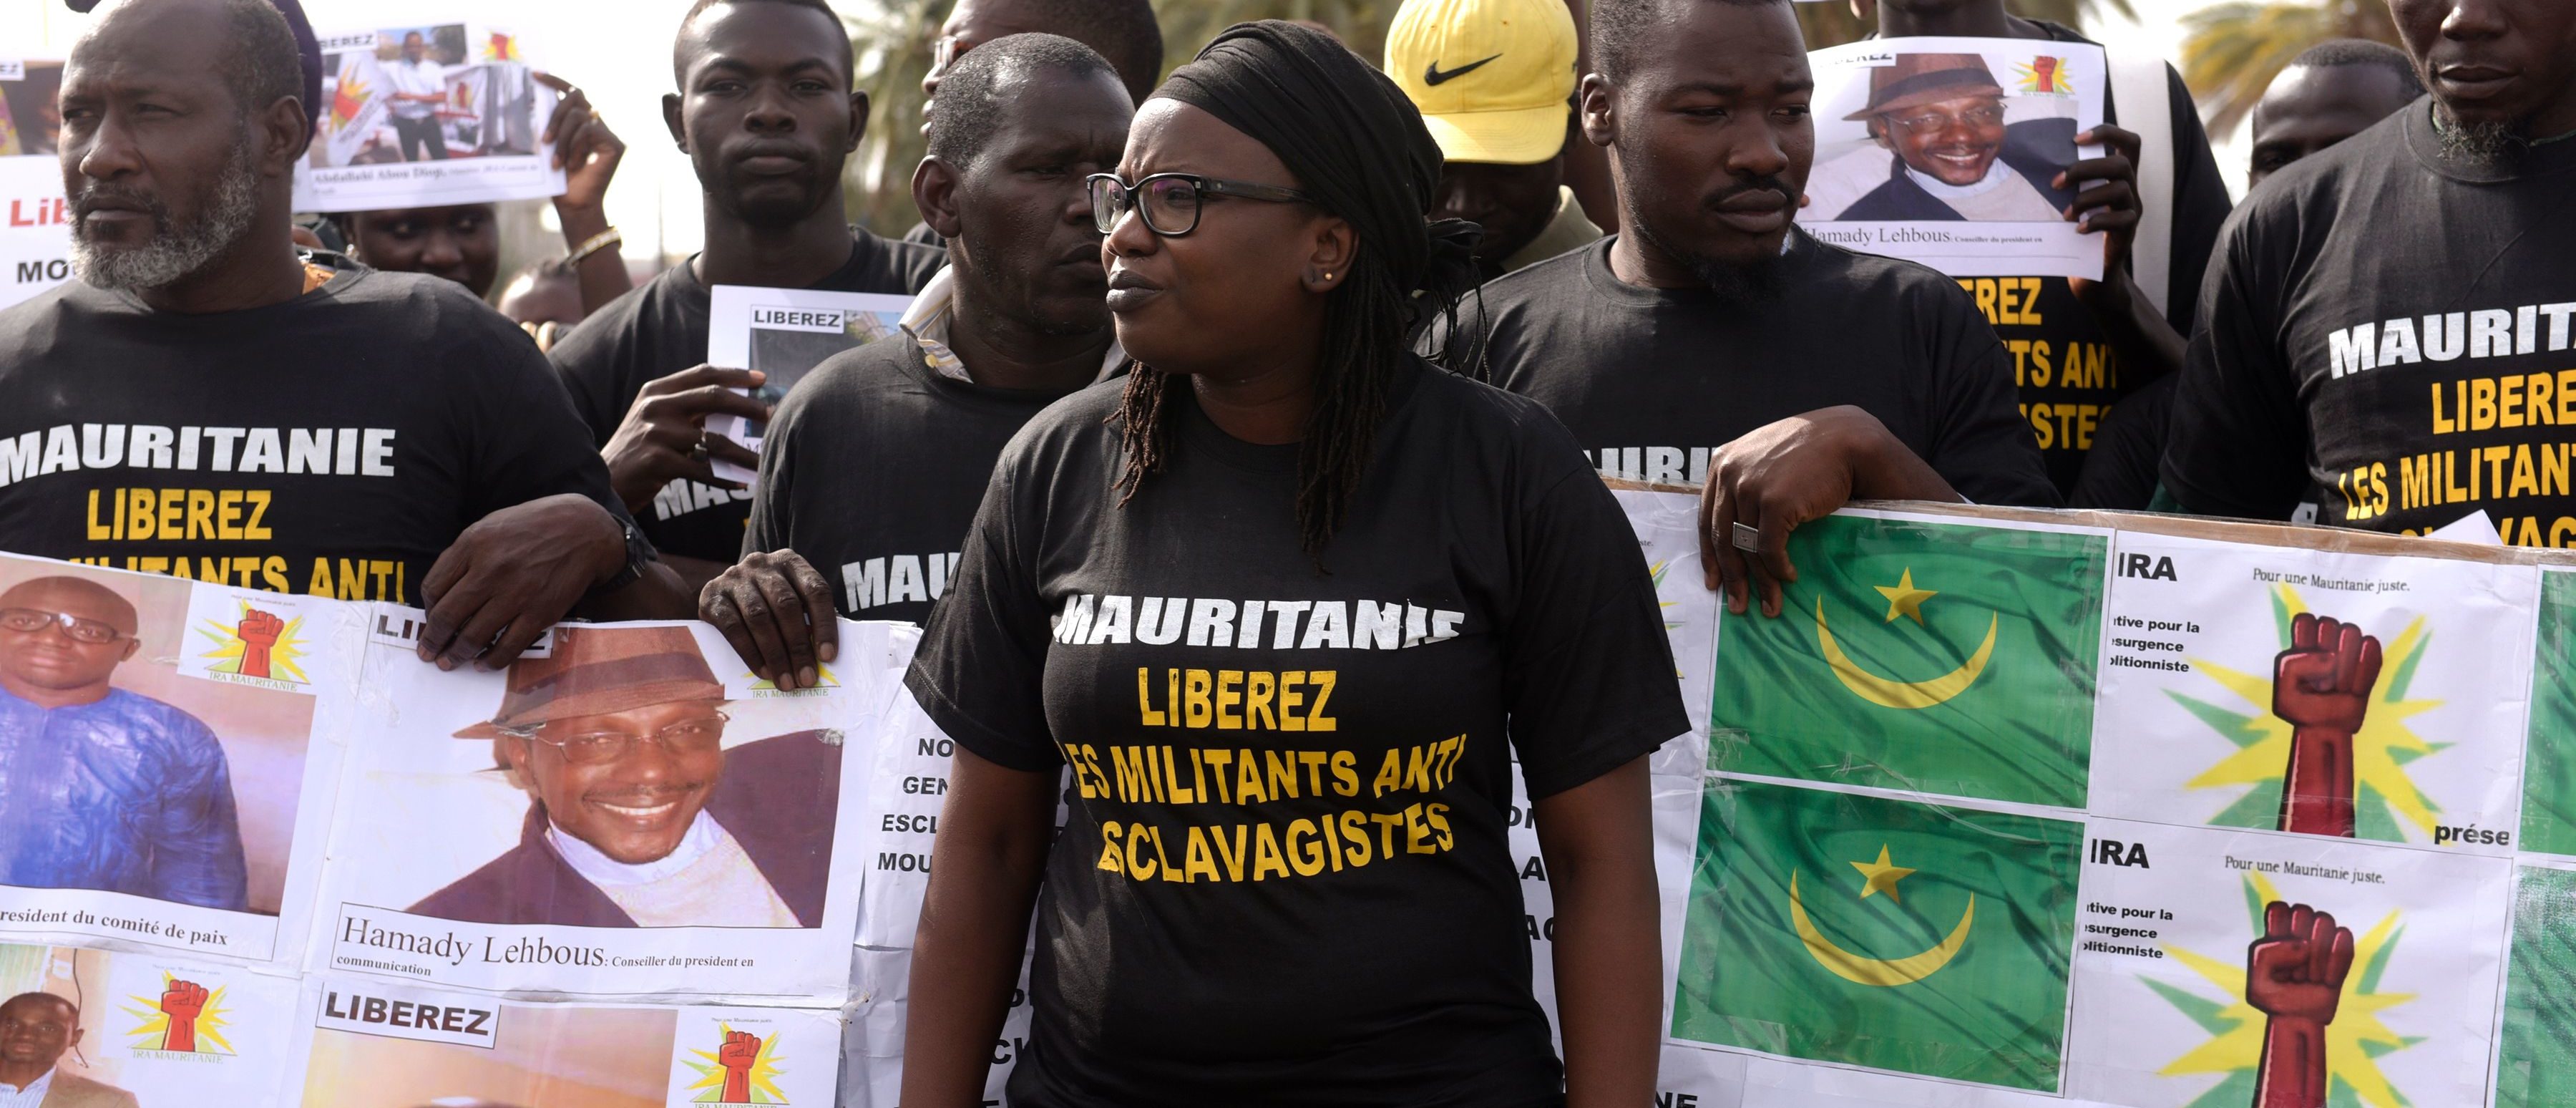 Anti slavery militants hold a banner which translates as "No to slavery and racism, no to the regime of the general dictator slavery racist Mouhamed Abdel Aziz" demonstrate on August 3, 2016 in Dakar against the imprisonement of fellow activists in Mauritania. / AFP / SEYLLOU (Photo credit should read SEYLLOU/AFP via Getty Images)